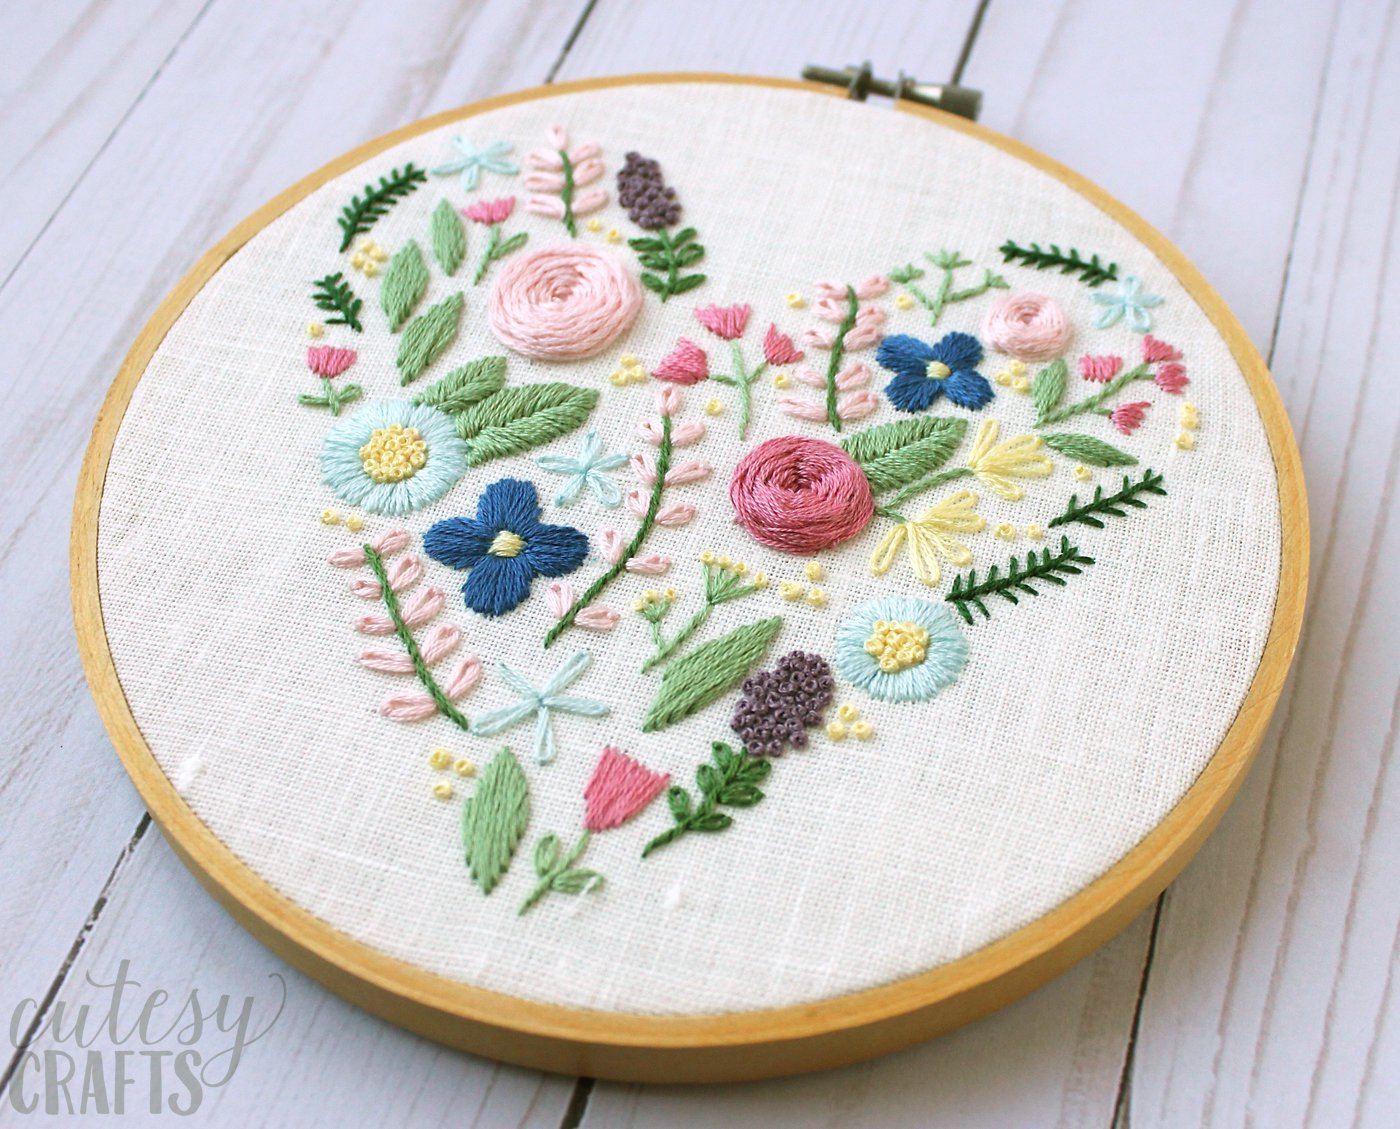 Free Hand Embroidery Pattern Floral Heart Hand Embroidery Pattern The Polka Dot Chair Free